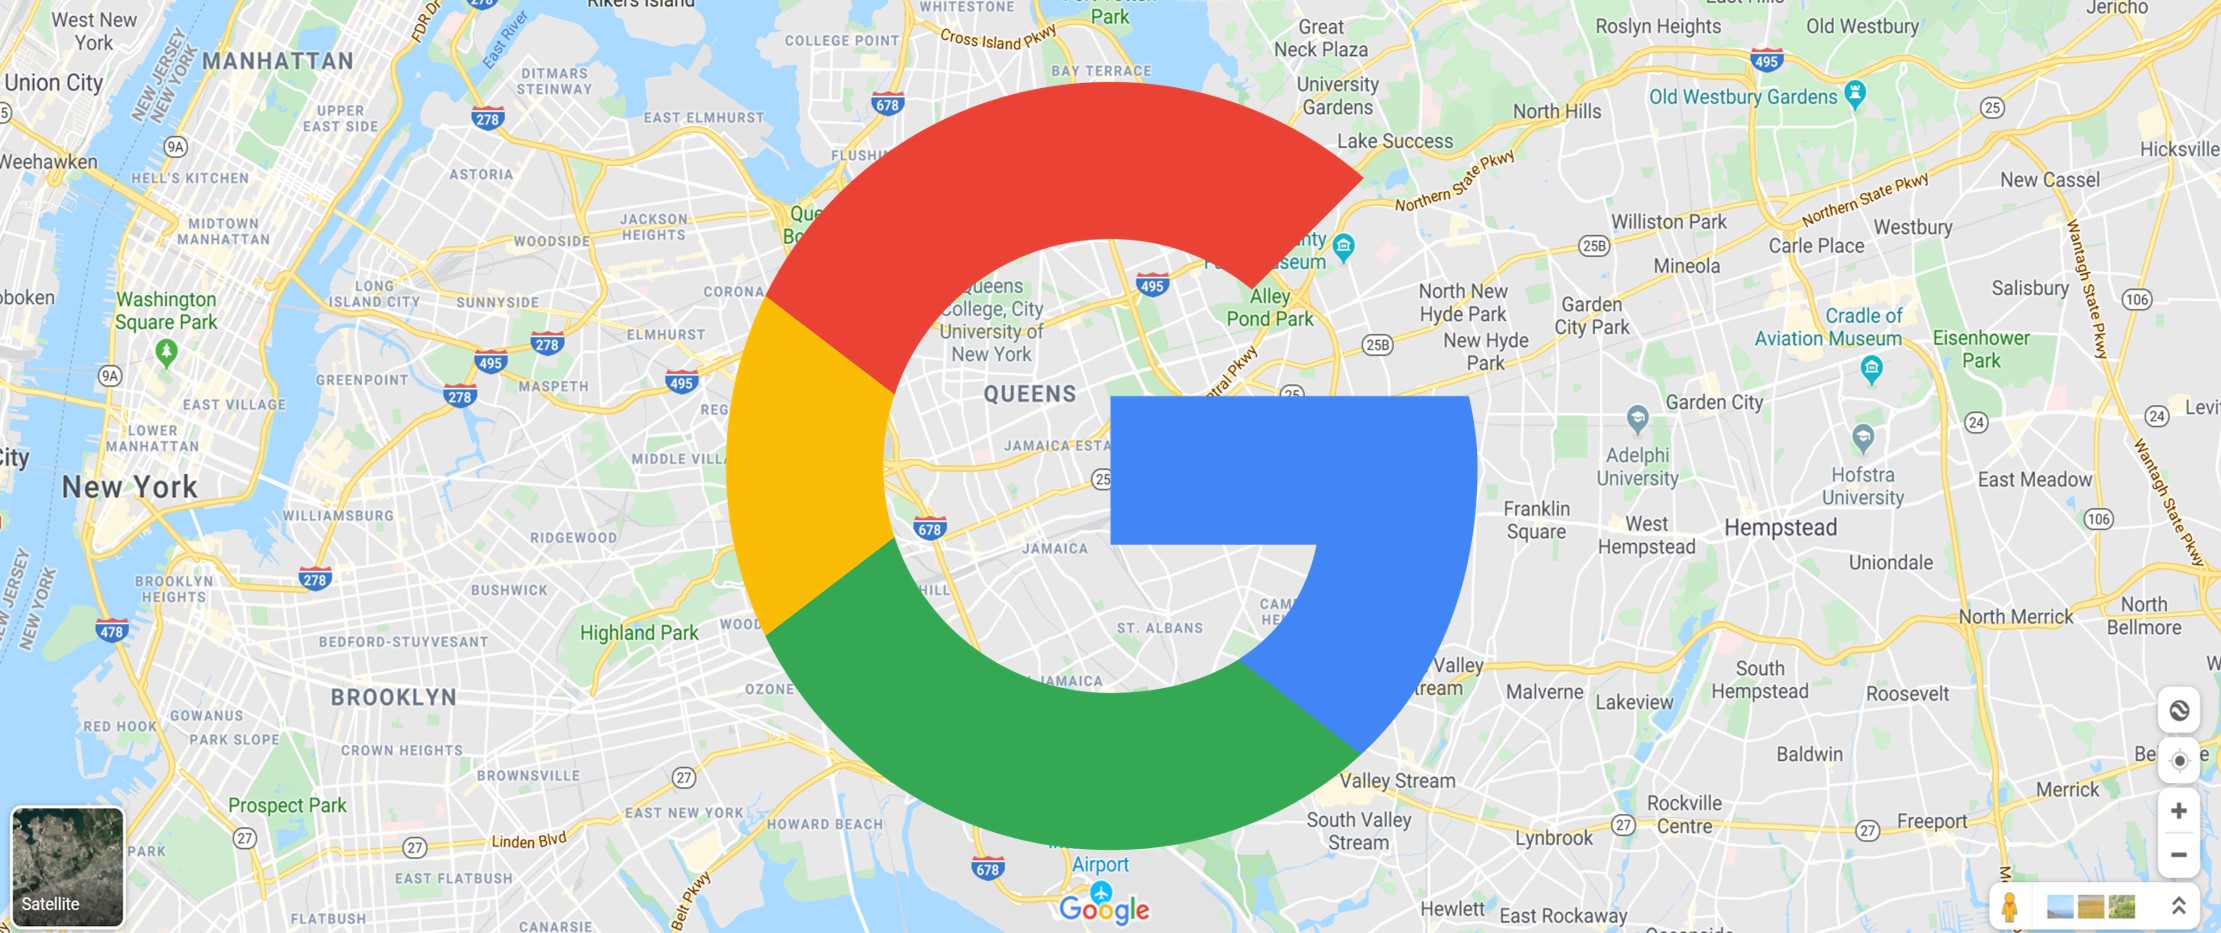 How to share live location with someone using Google Maps